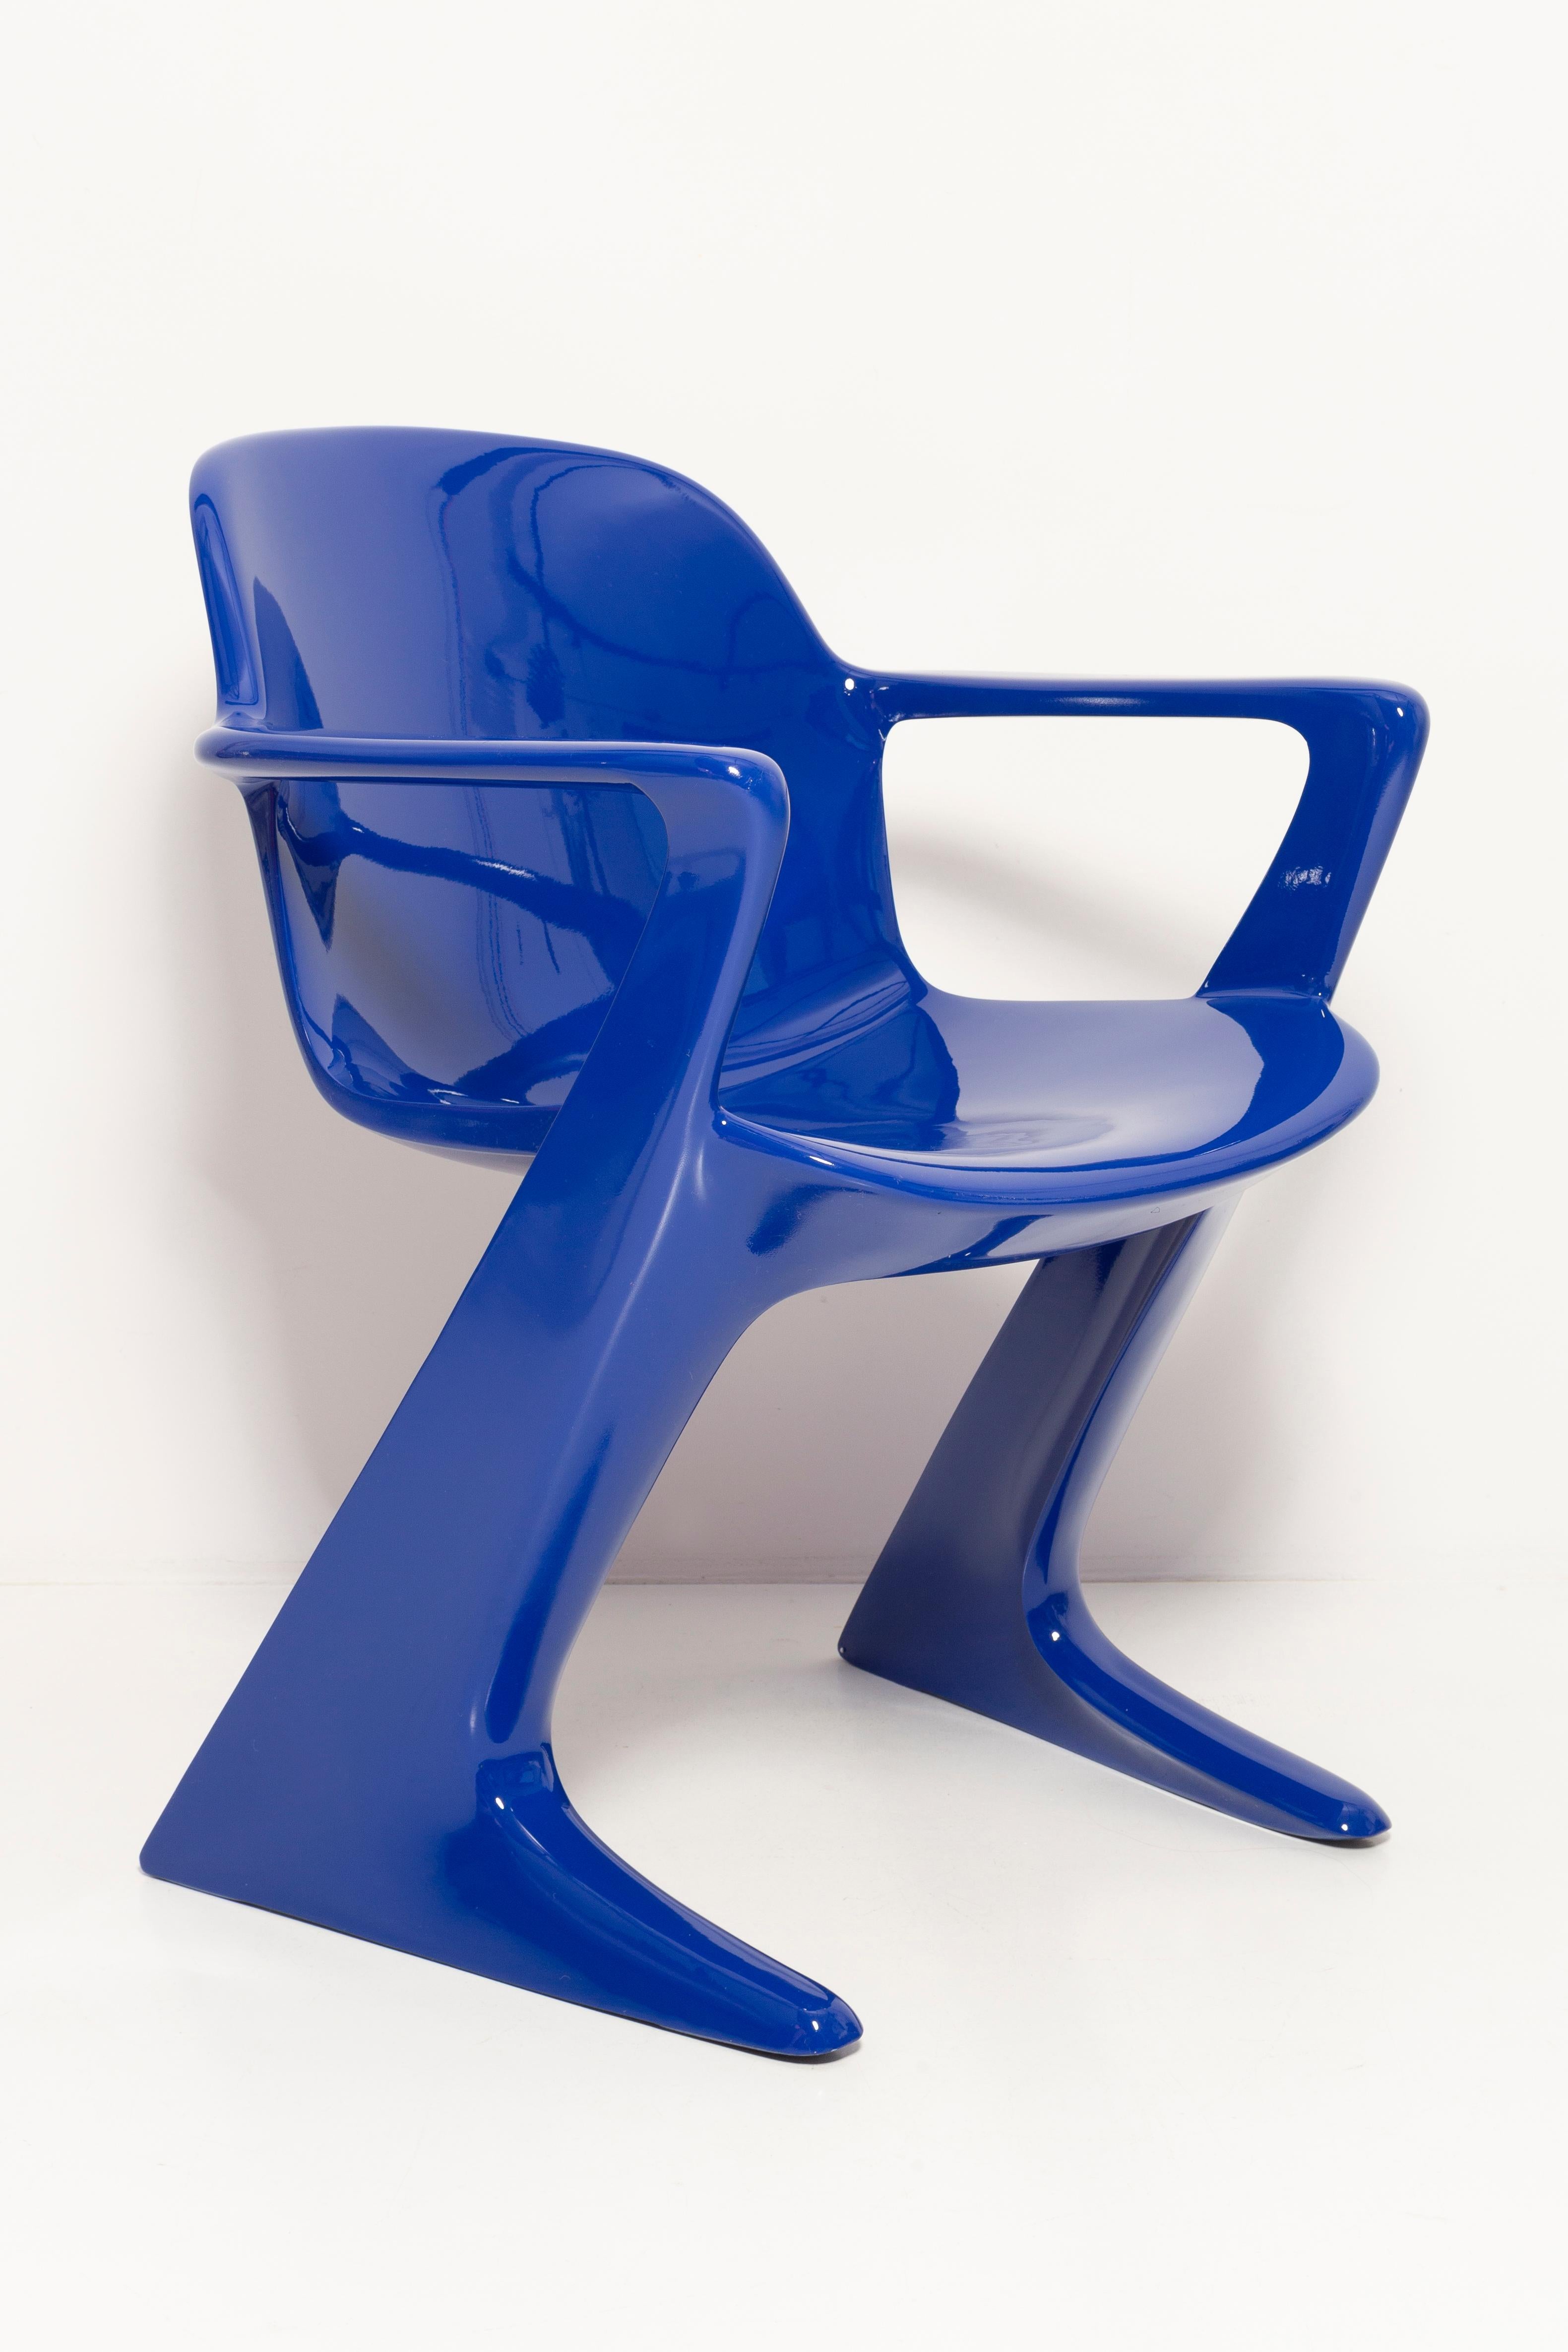 Lacquered Set of Eight Ultramarine Blue Kangaroo Chairs, by Ernst Moeckl, Germany, 1968 For Sale